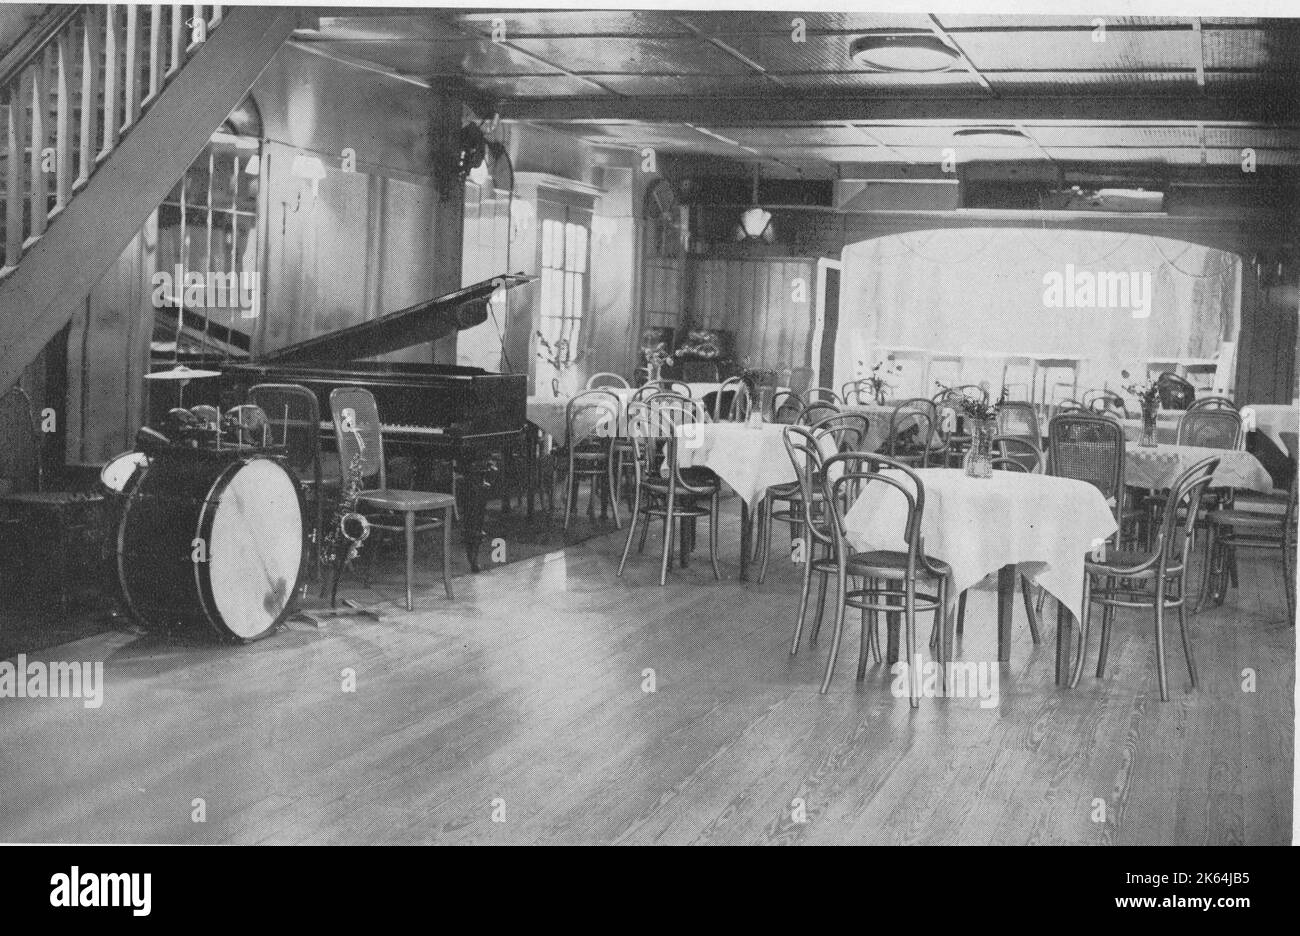 View of the dance floor at the 43 club, 43, Gerrard St, Soho, London, run by Kate 'Ma' Meyrick, Queen of the Nightclubs. Kate Evelyn 'Ma' Meyrick (1875 -1933), an Irish business woman and 'Queen' of the London nightclub scene. She ran '43', a late-night jazz club at 43 Gerrard Street in Soho, was prosecuted several times for breaching licensing laws and went to prison for bribing policemen to ignore these breaches. Her book 'Secrets of the 43' was banned on its publication in 1933. Three of her daughters married peers of the realm. Stock Photo